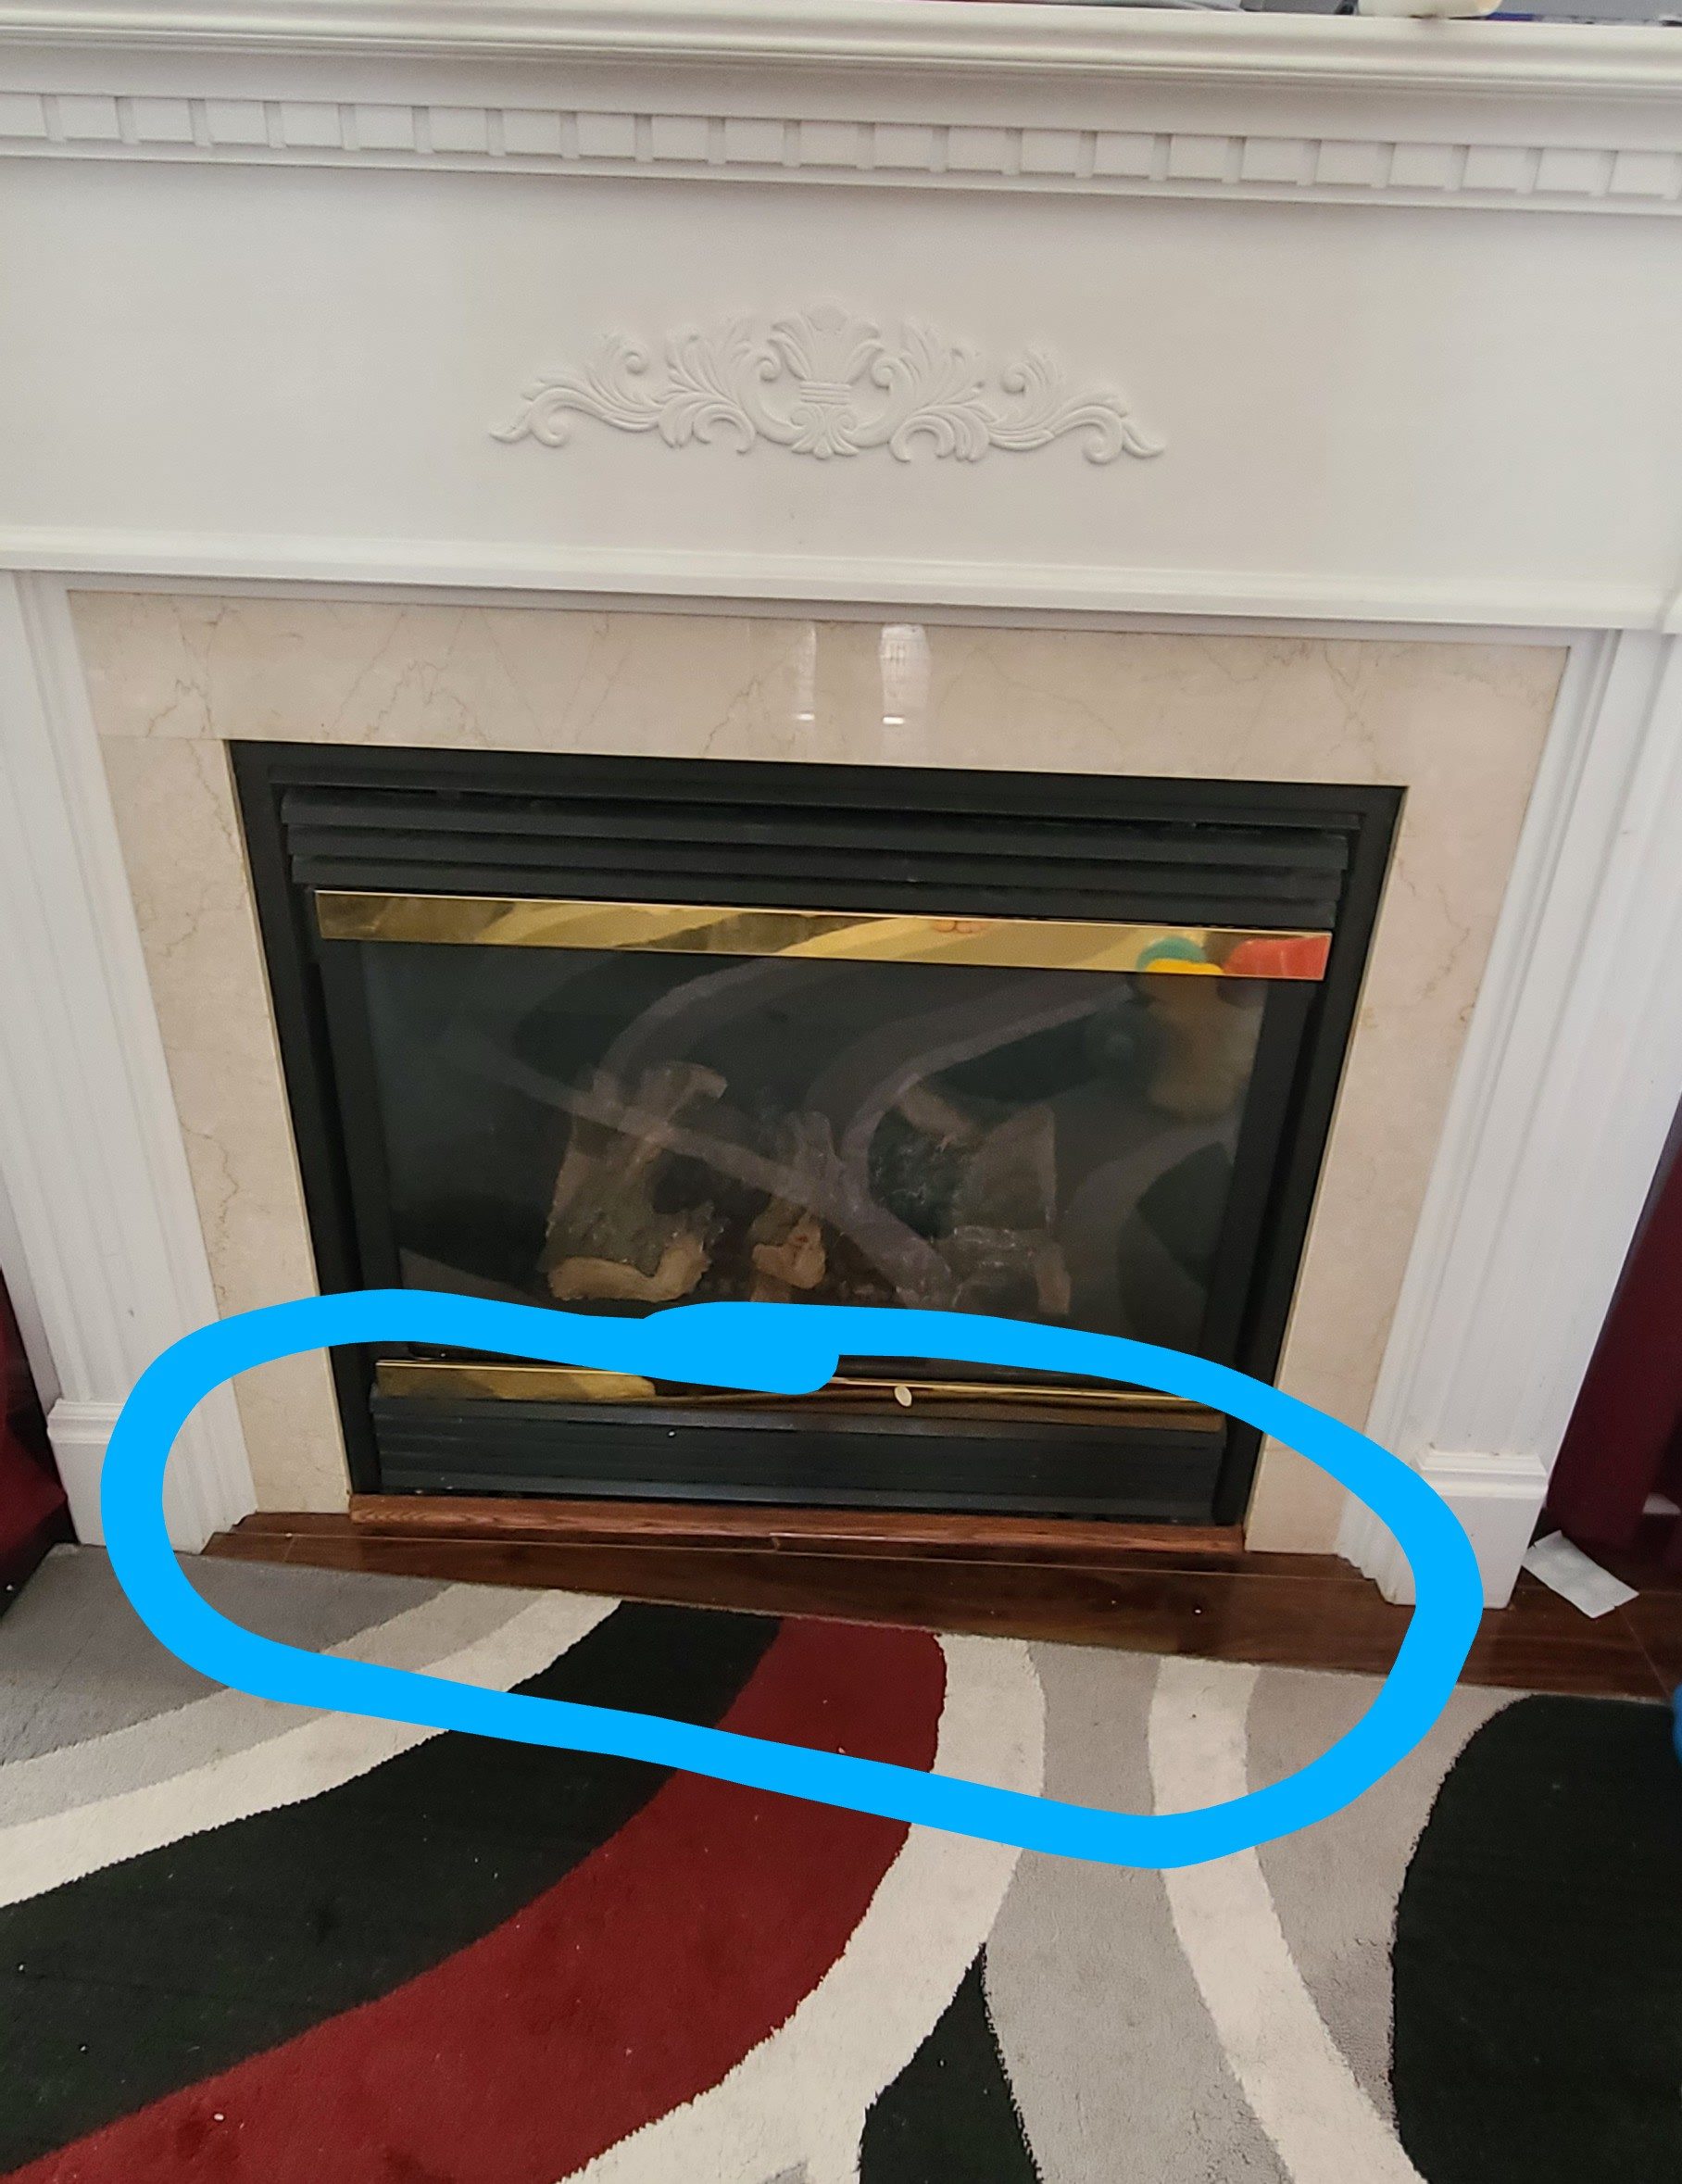 Can I seal these vents on my gas fireplace? Cold air constantly